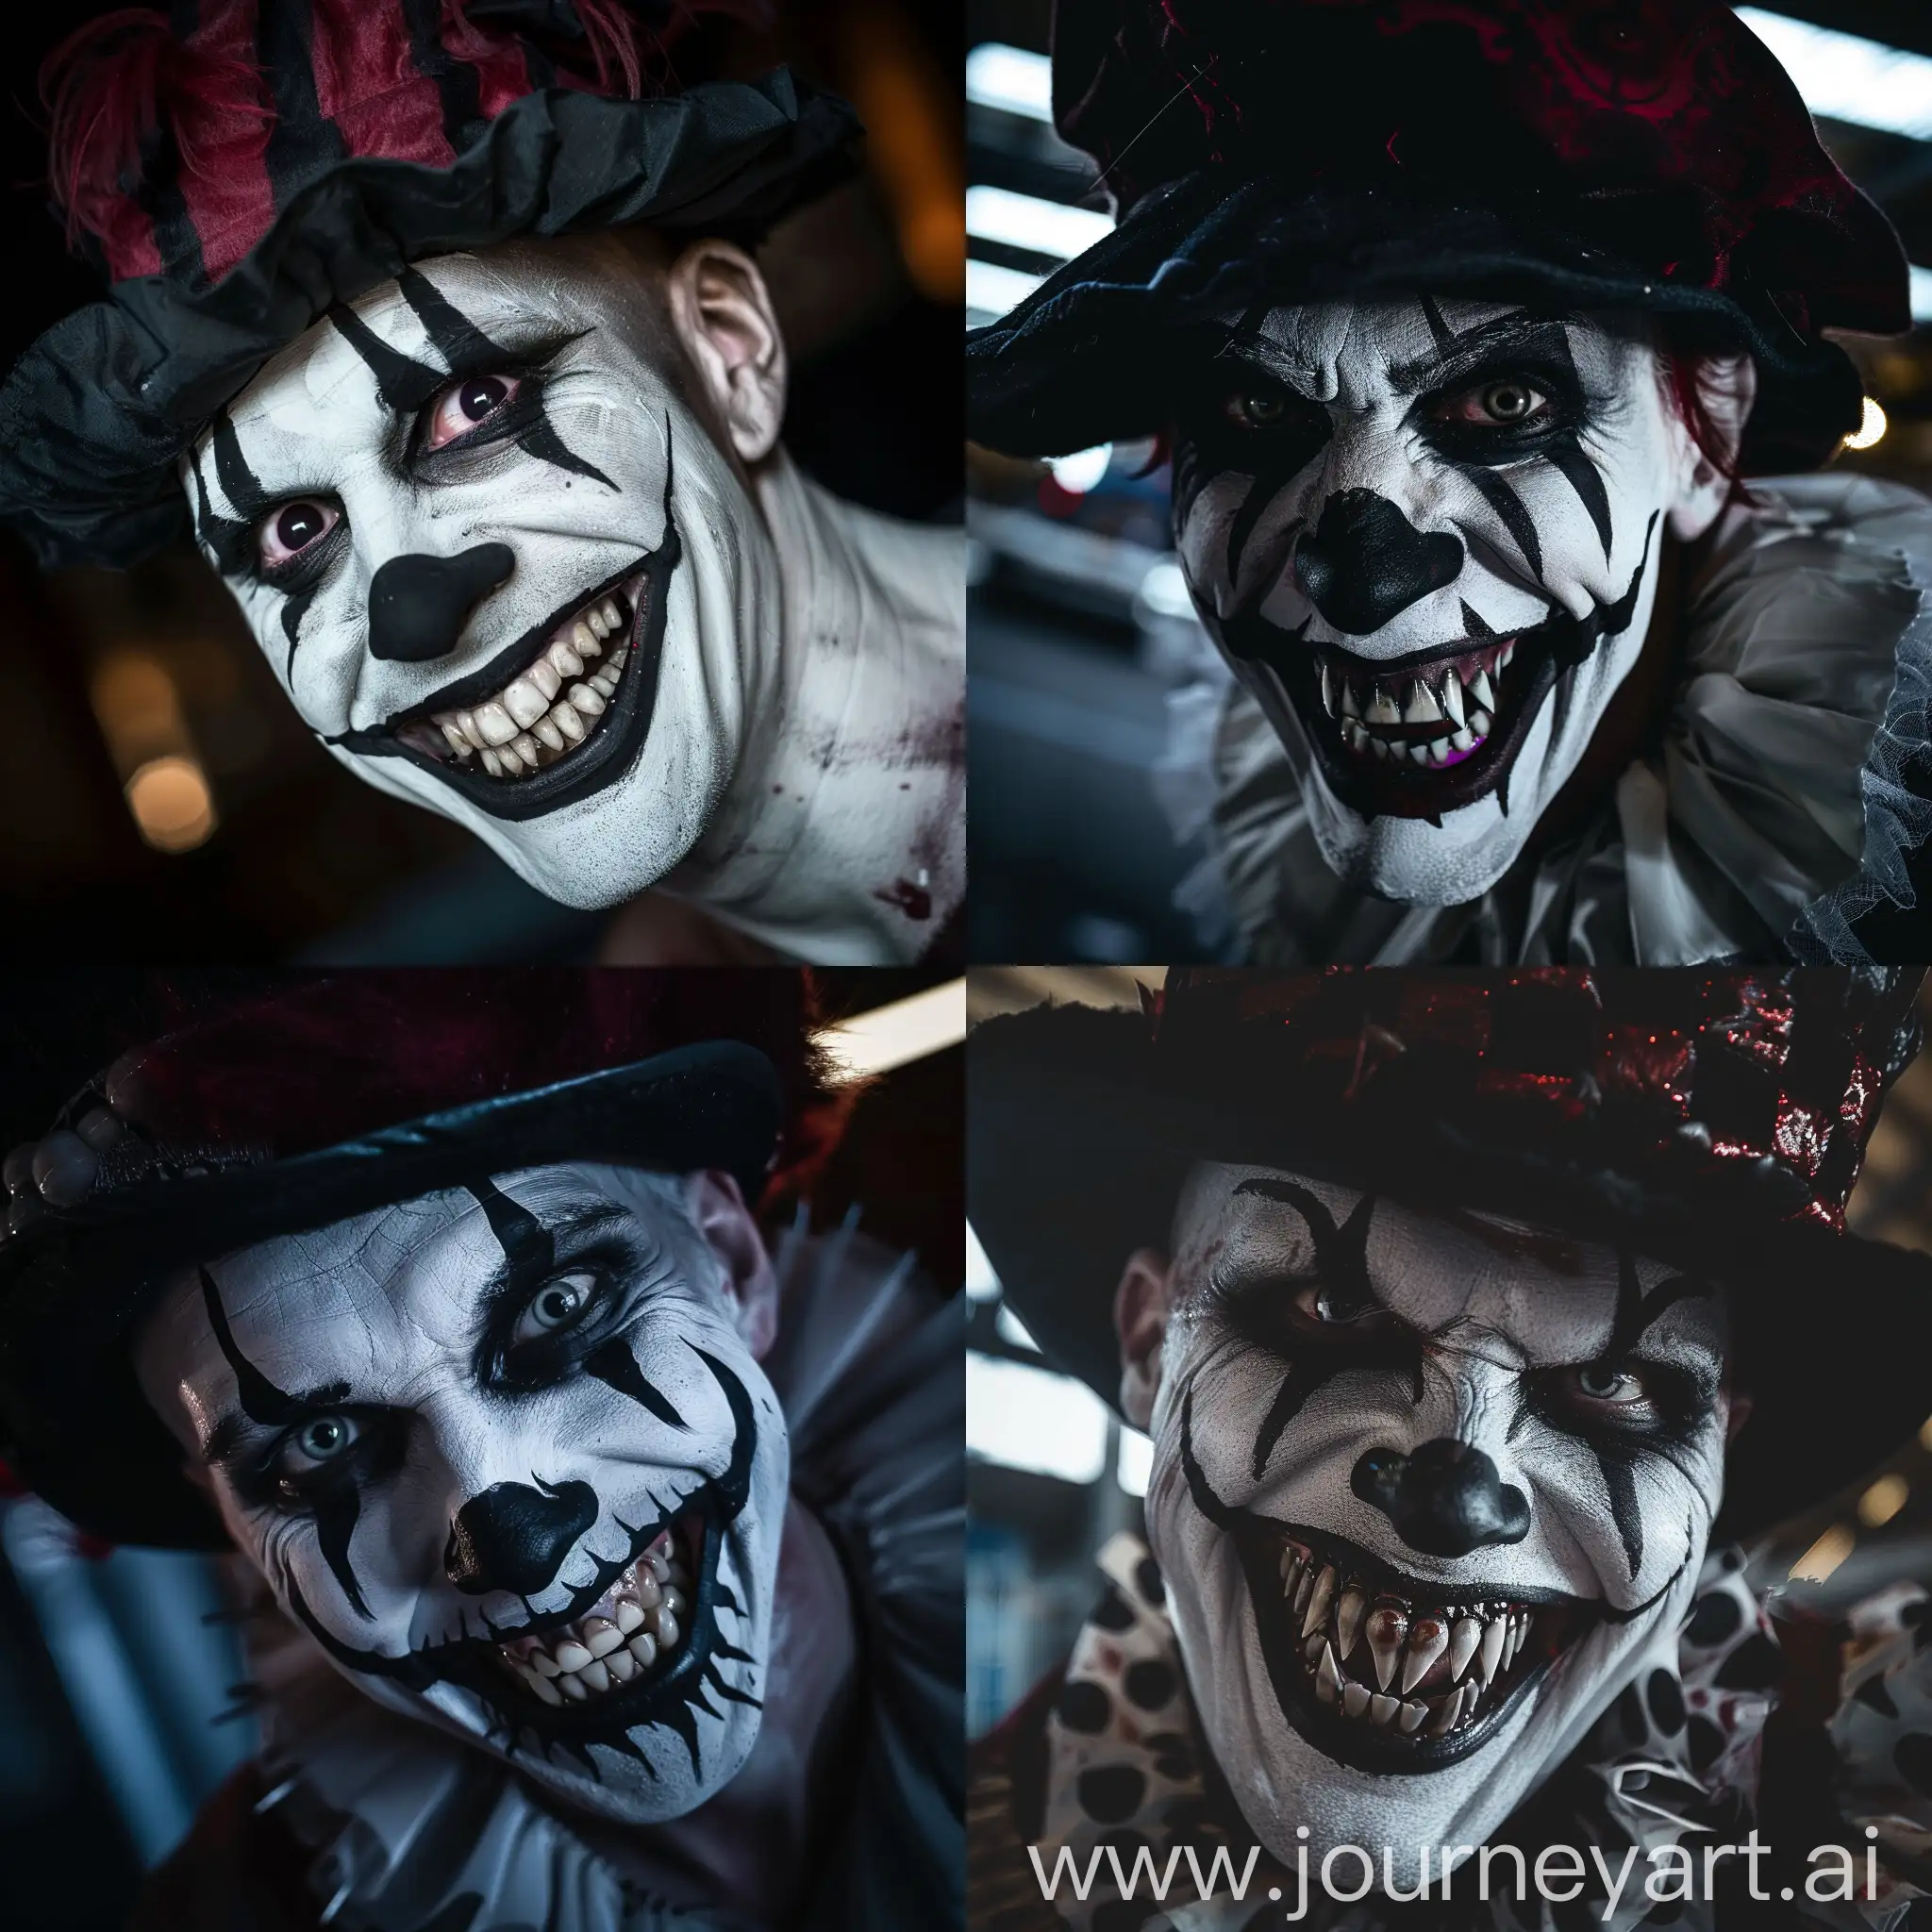 Sinister-Clown-with-White-Facepaint-and-Sharp-Teeth-in-Dark-Warehouse